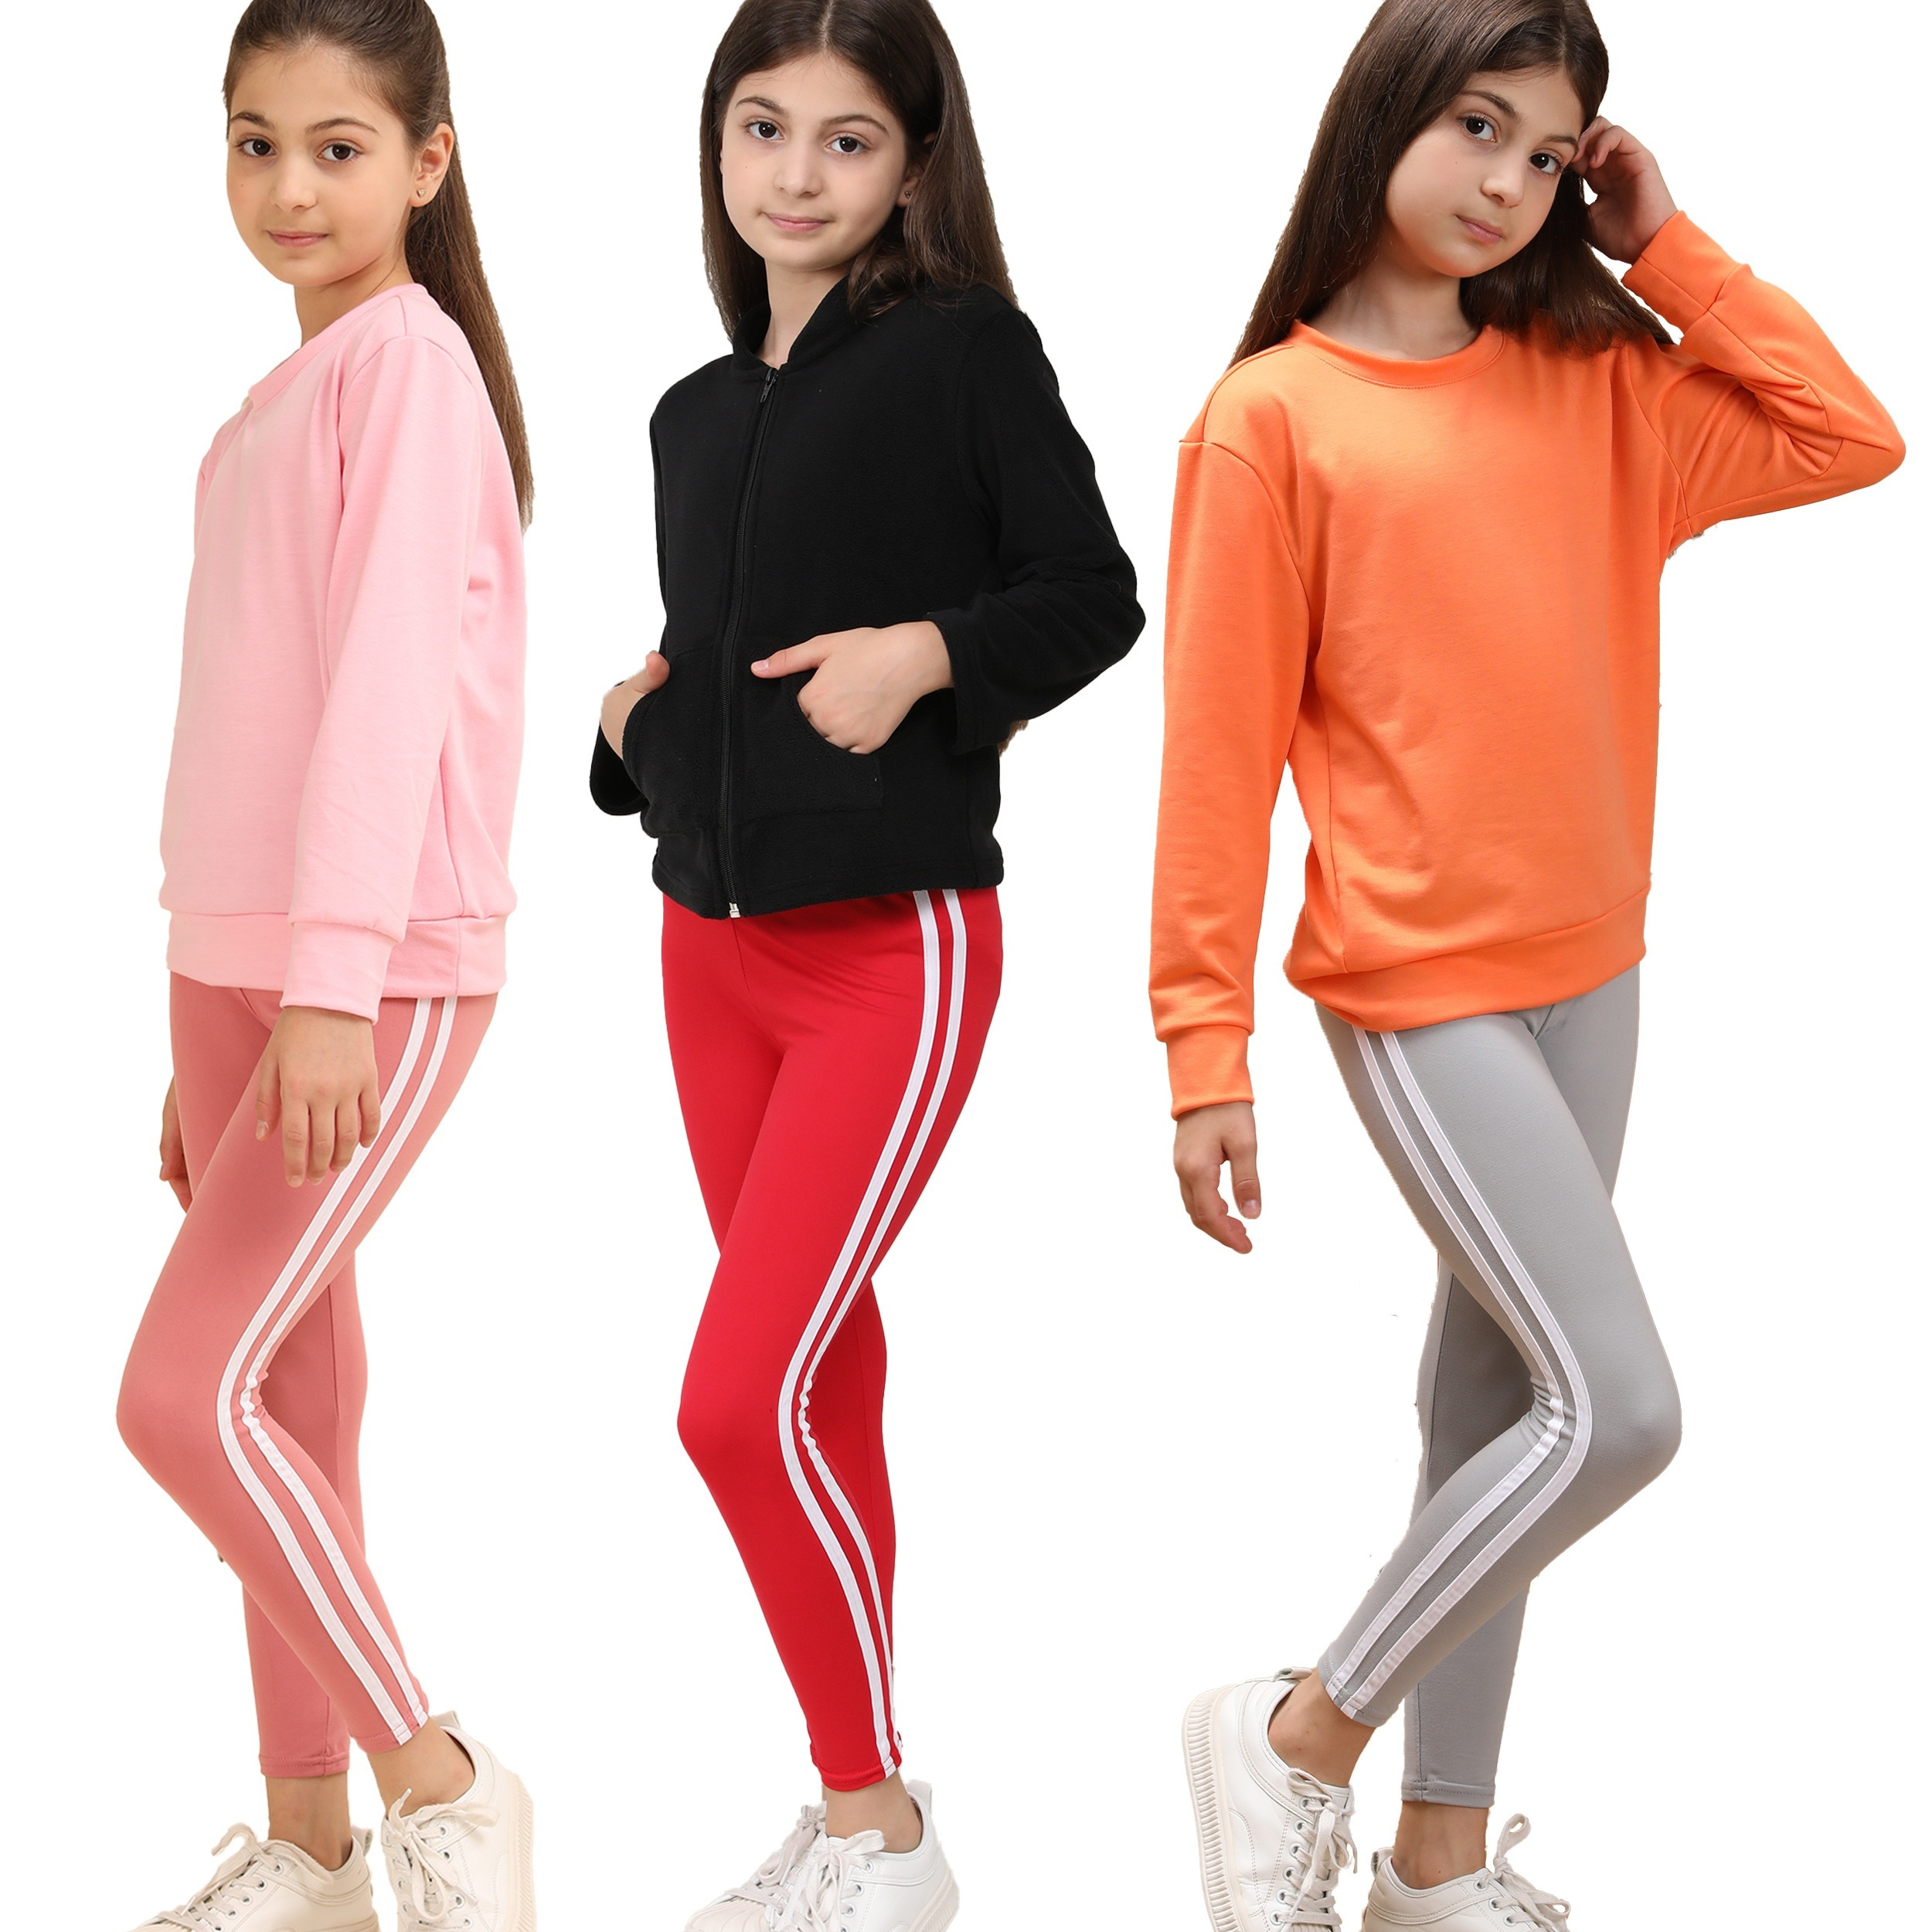 

3 Packs Comfy Stretchy Solid Stripped Side Leggings Casual Sweatpants For Sports